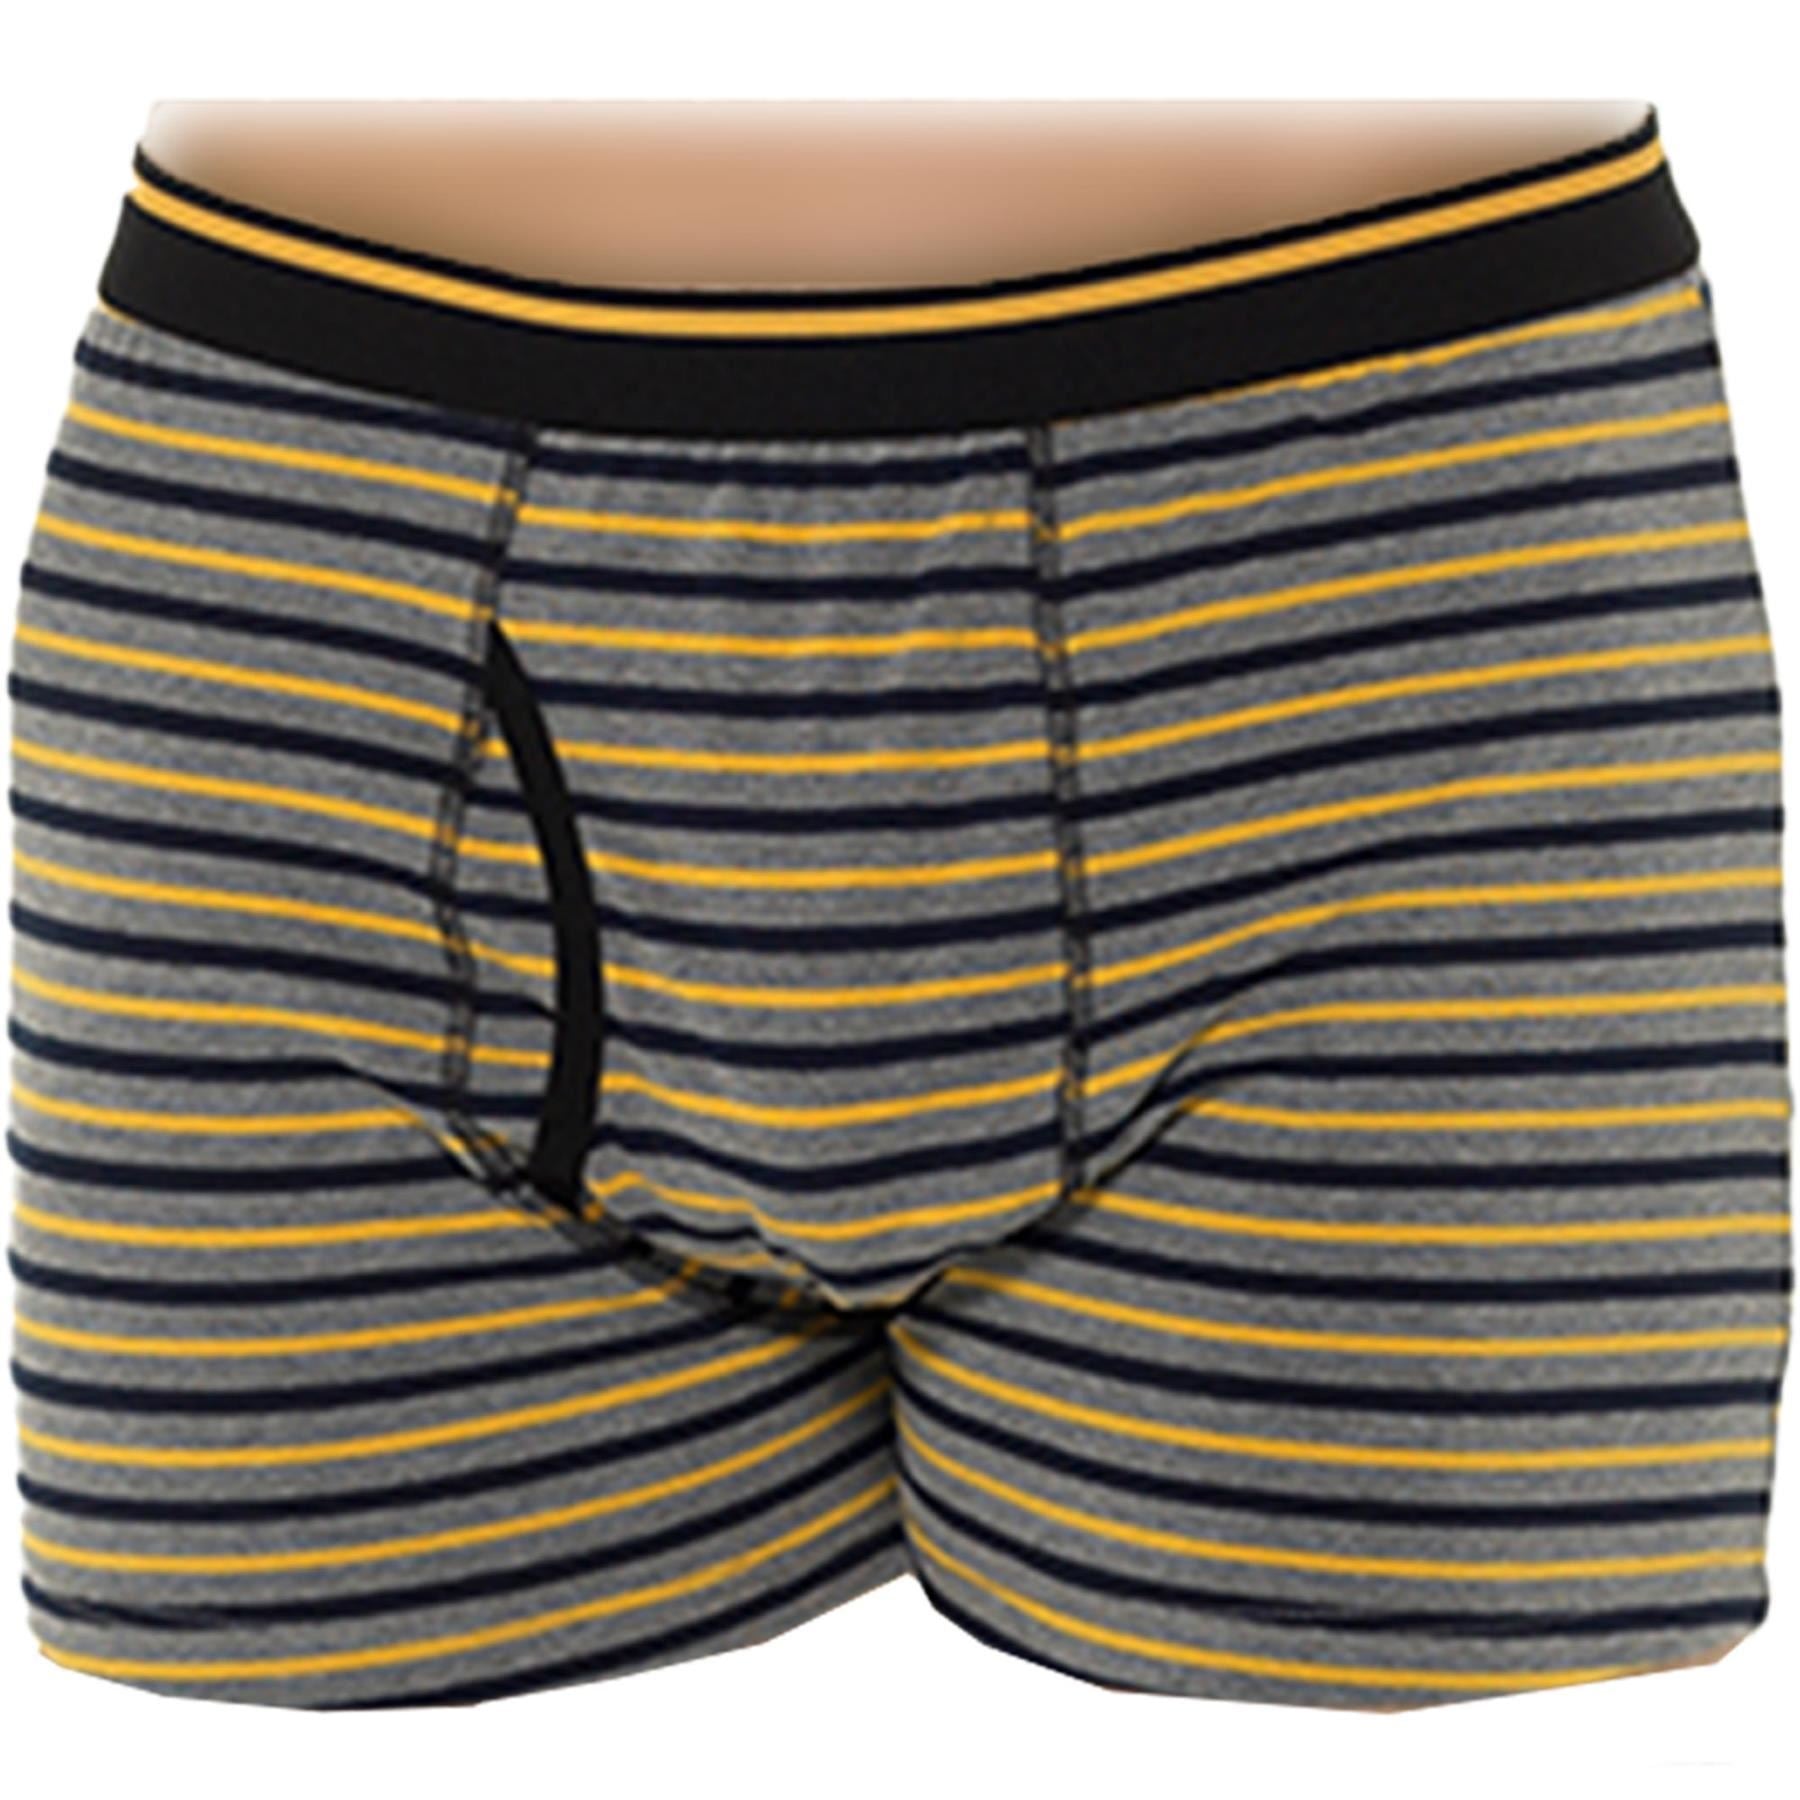 Mens Keyhole Trunks Shorts Underwear Pack Of 3 Knickers Elasticated Waistband